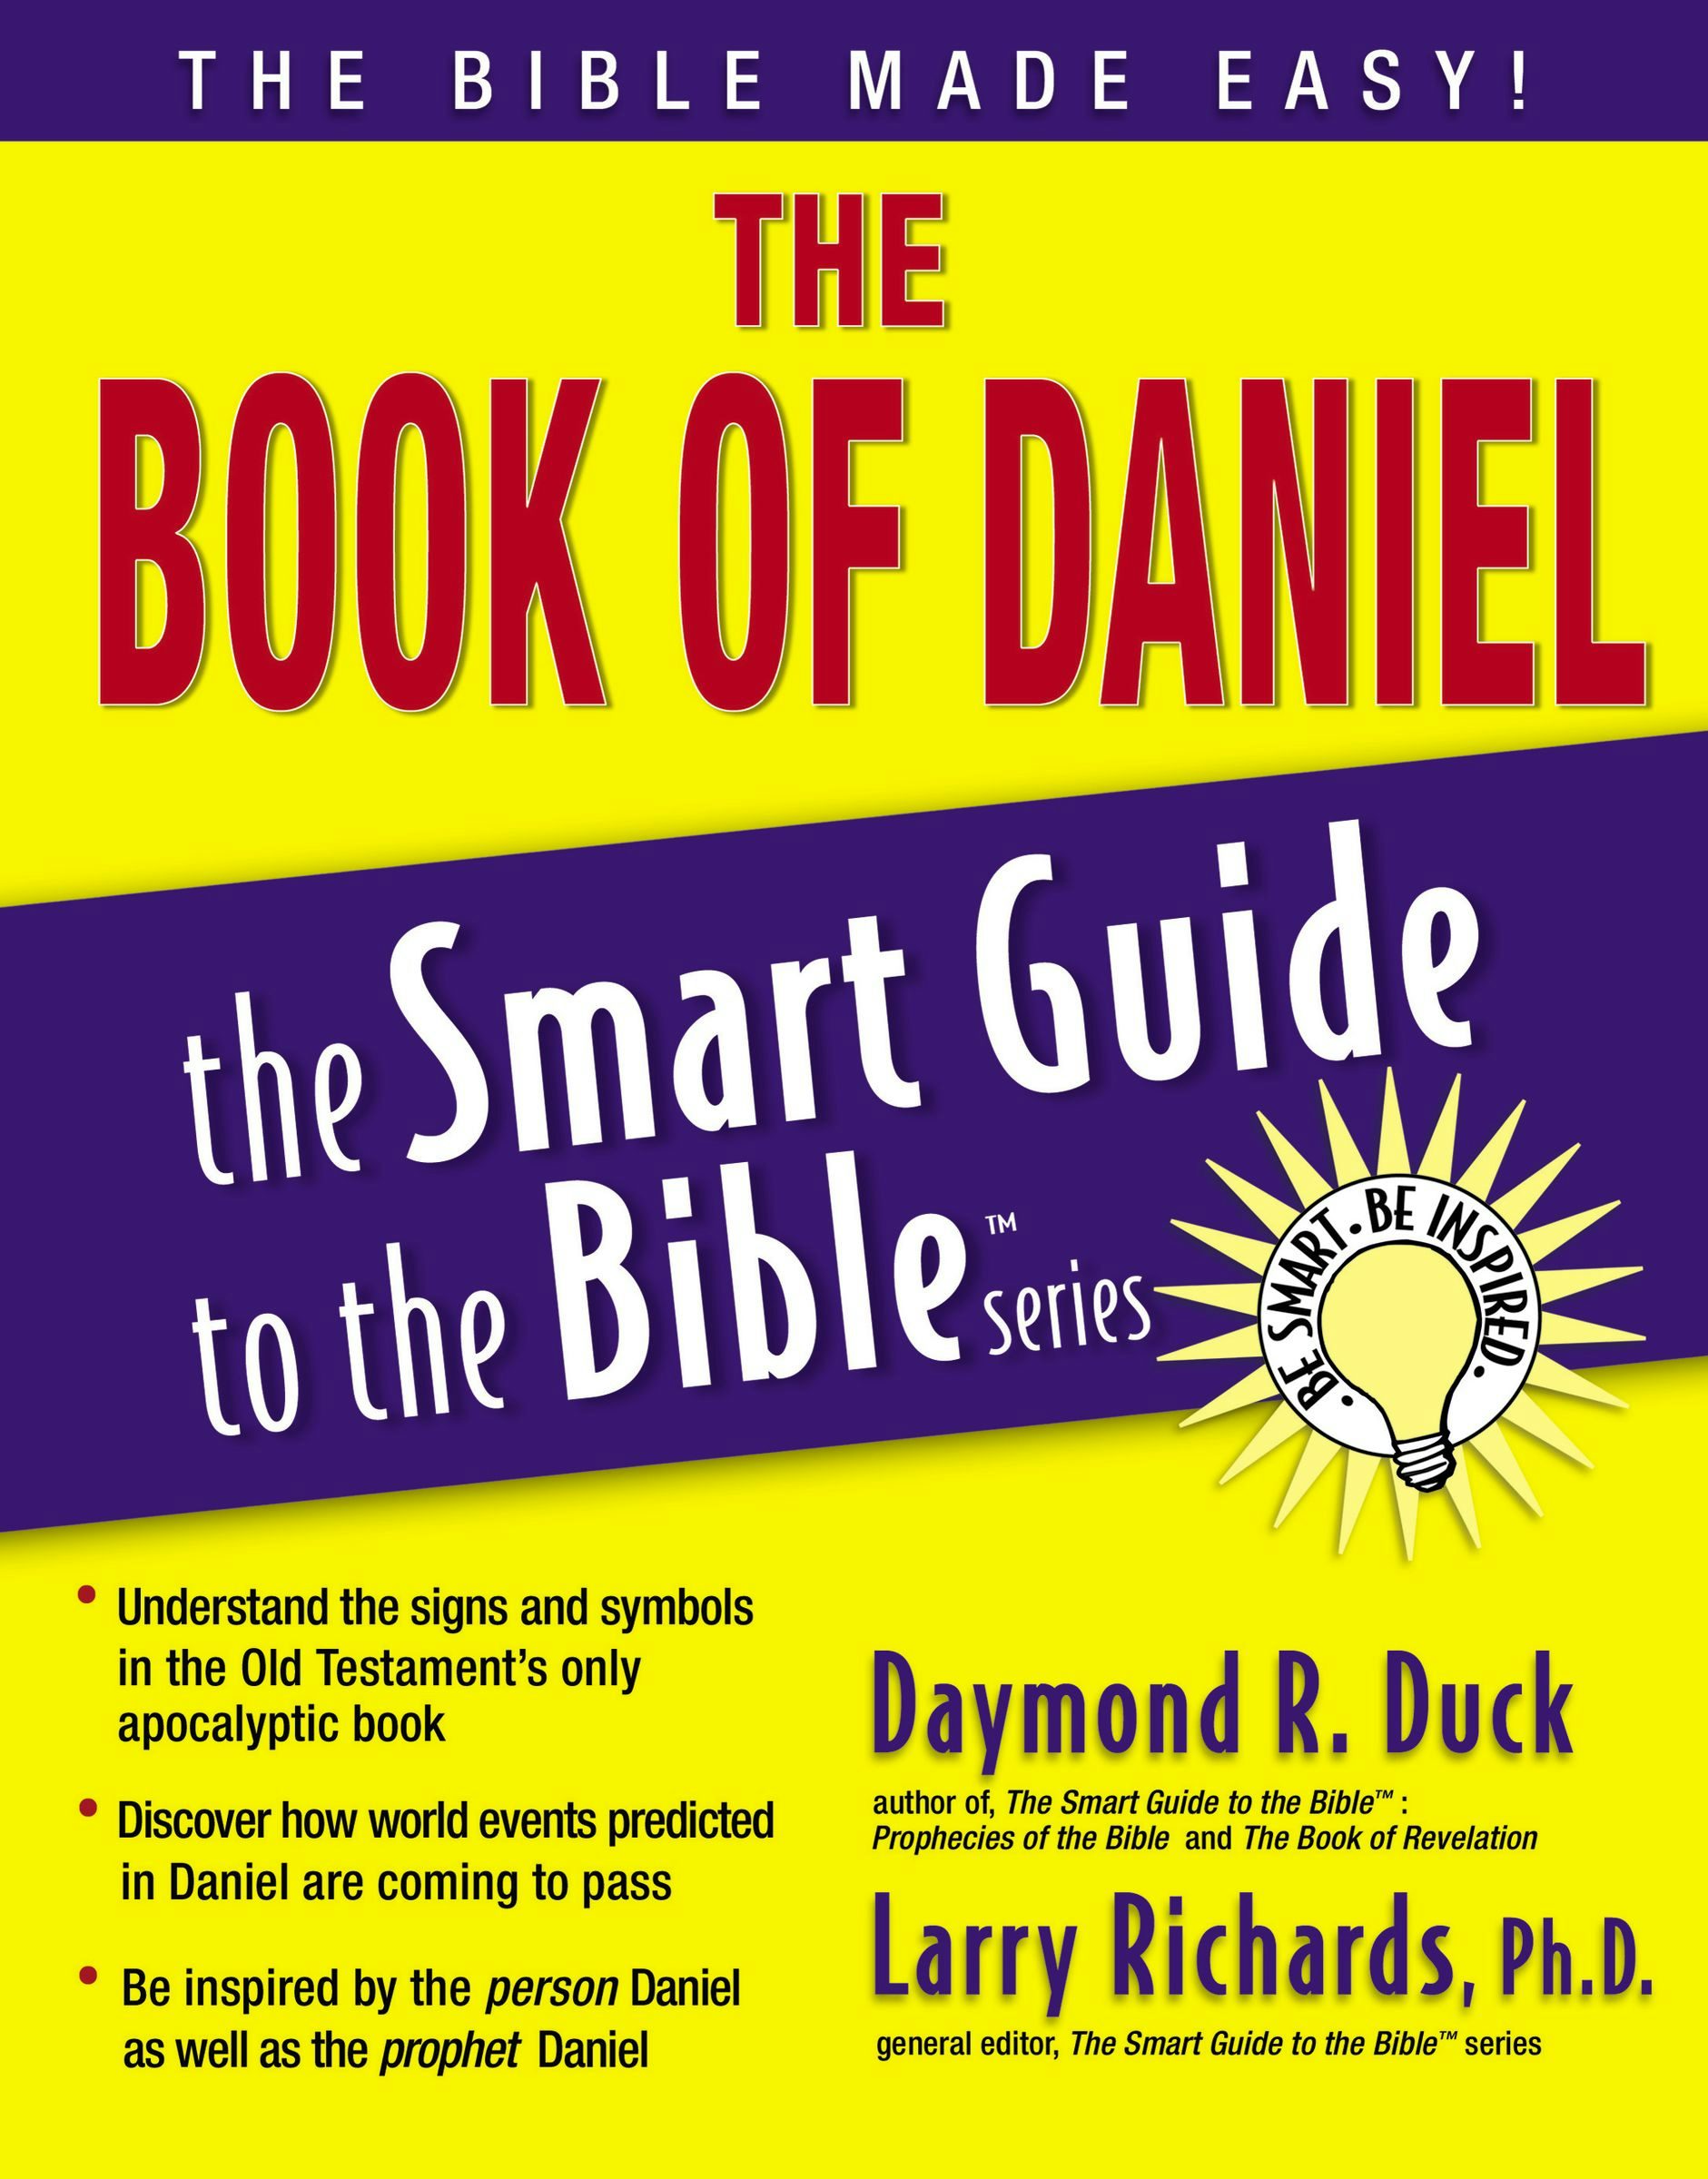 how old is the book of daniel